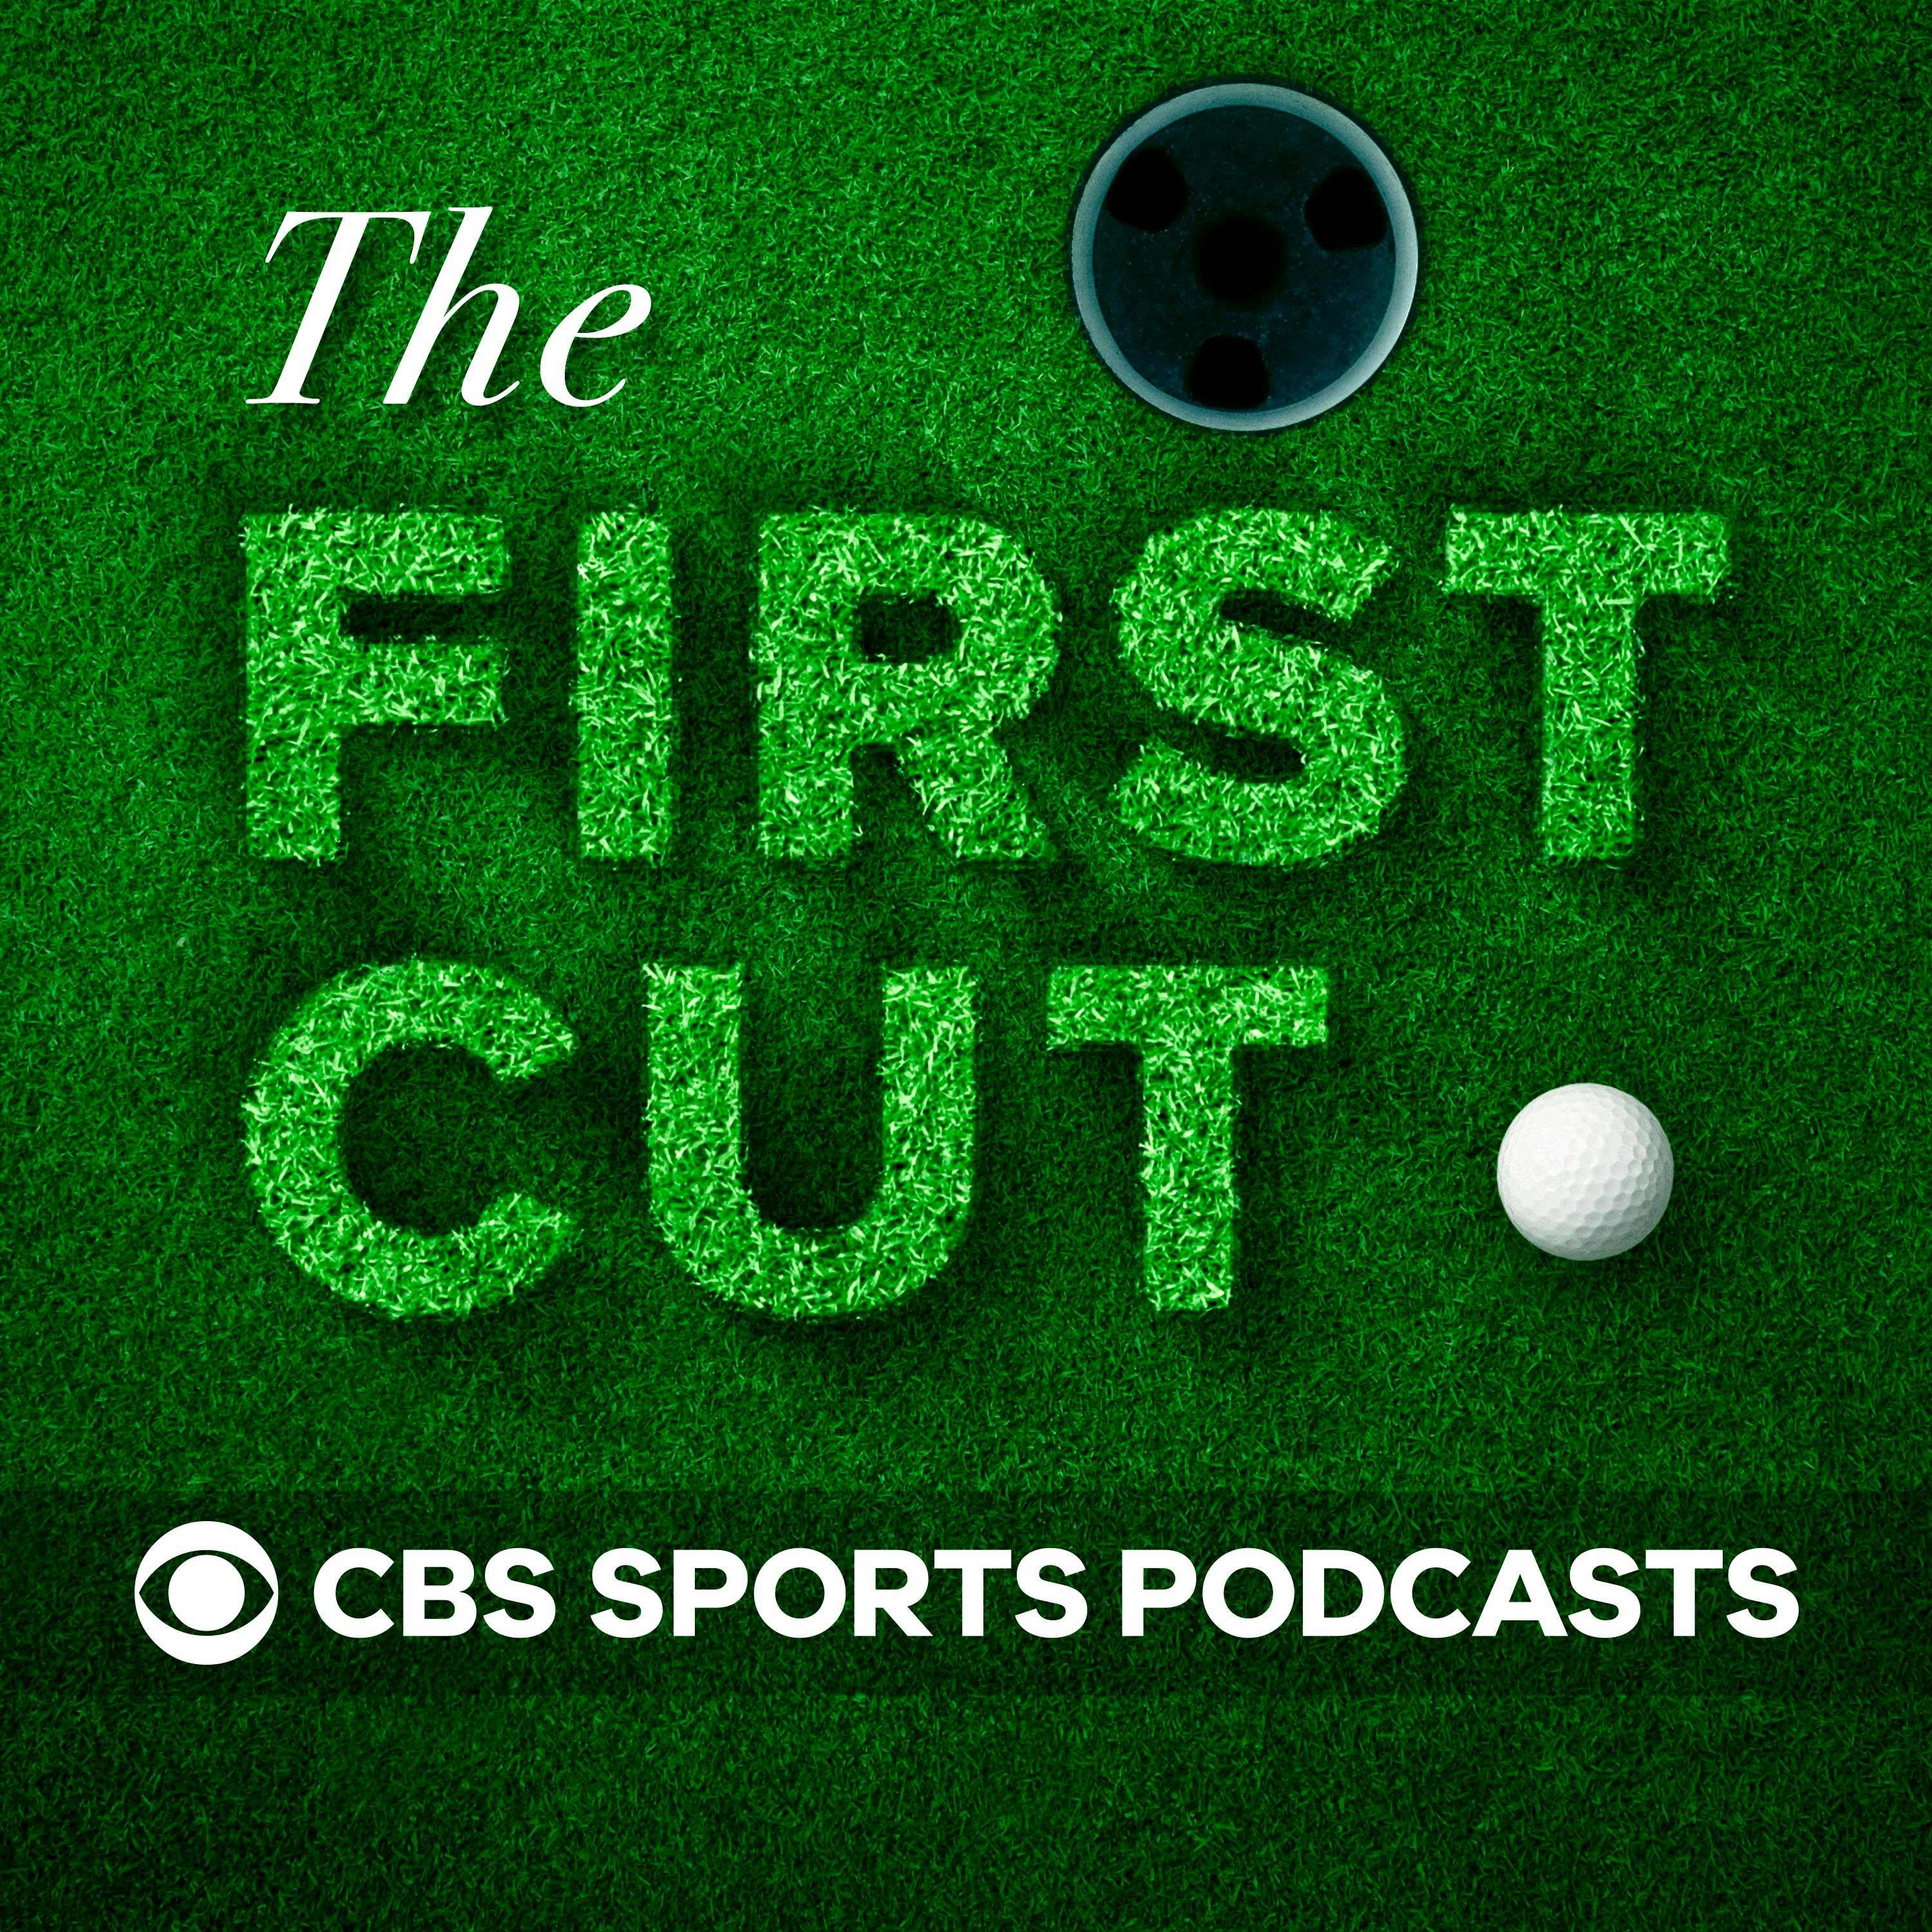 II. Benefits of Listening to Golf Podcasts